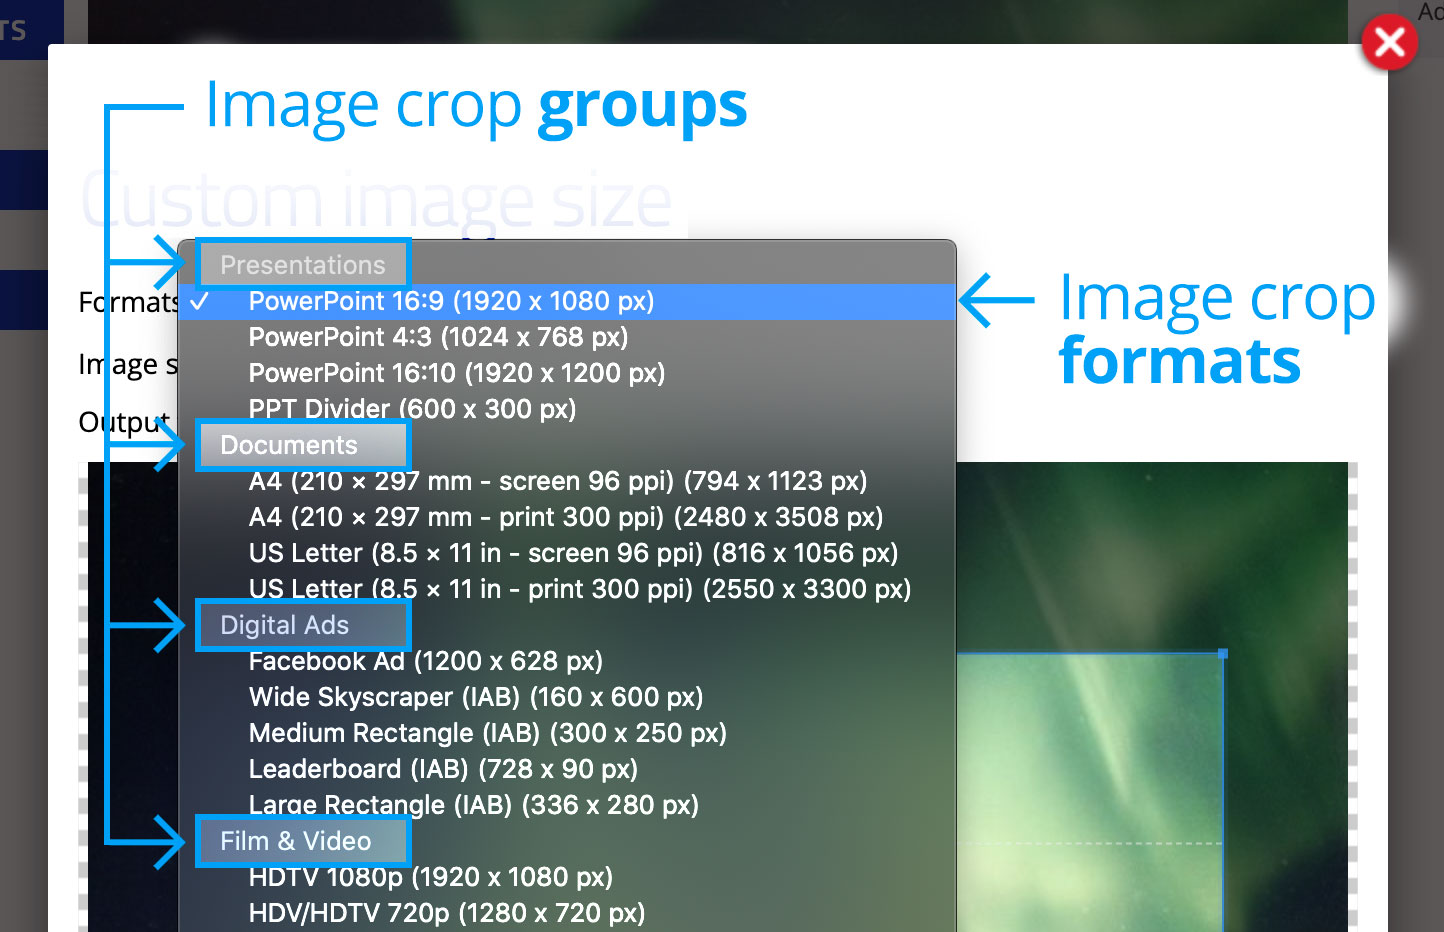 Image crop groups and formats